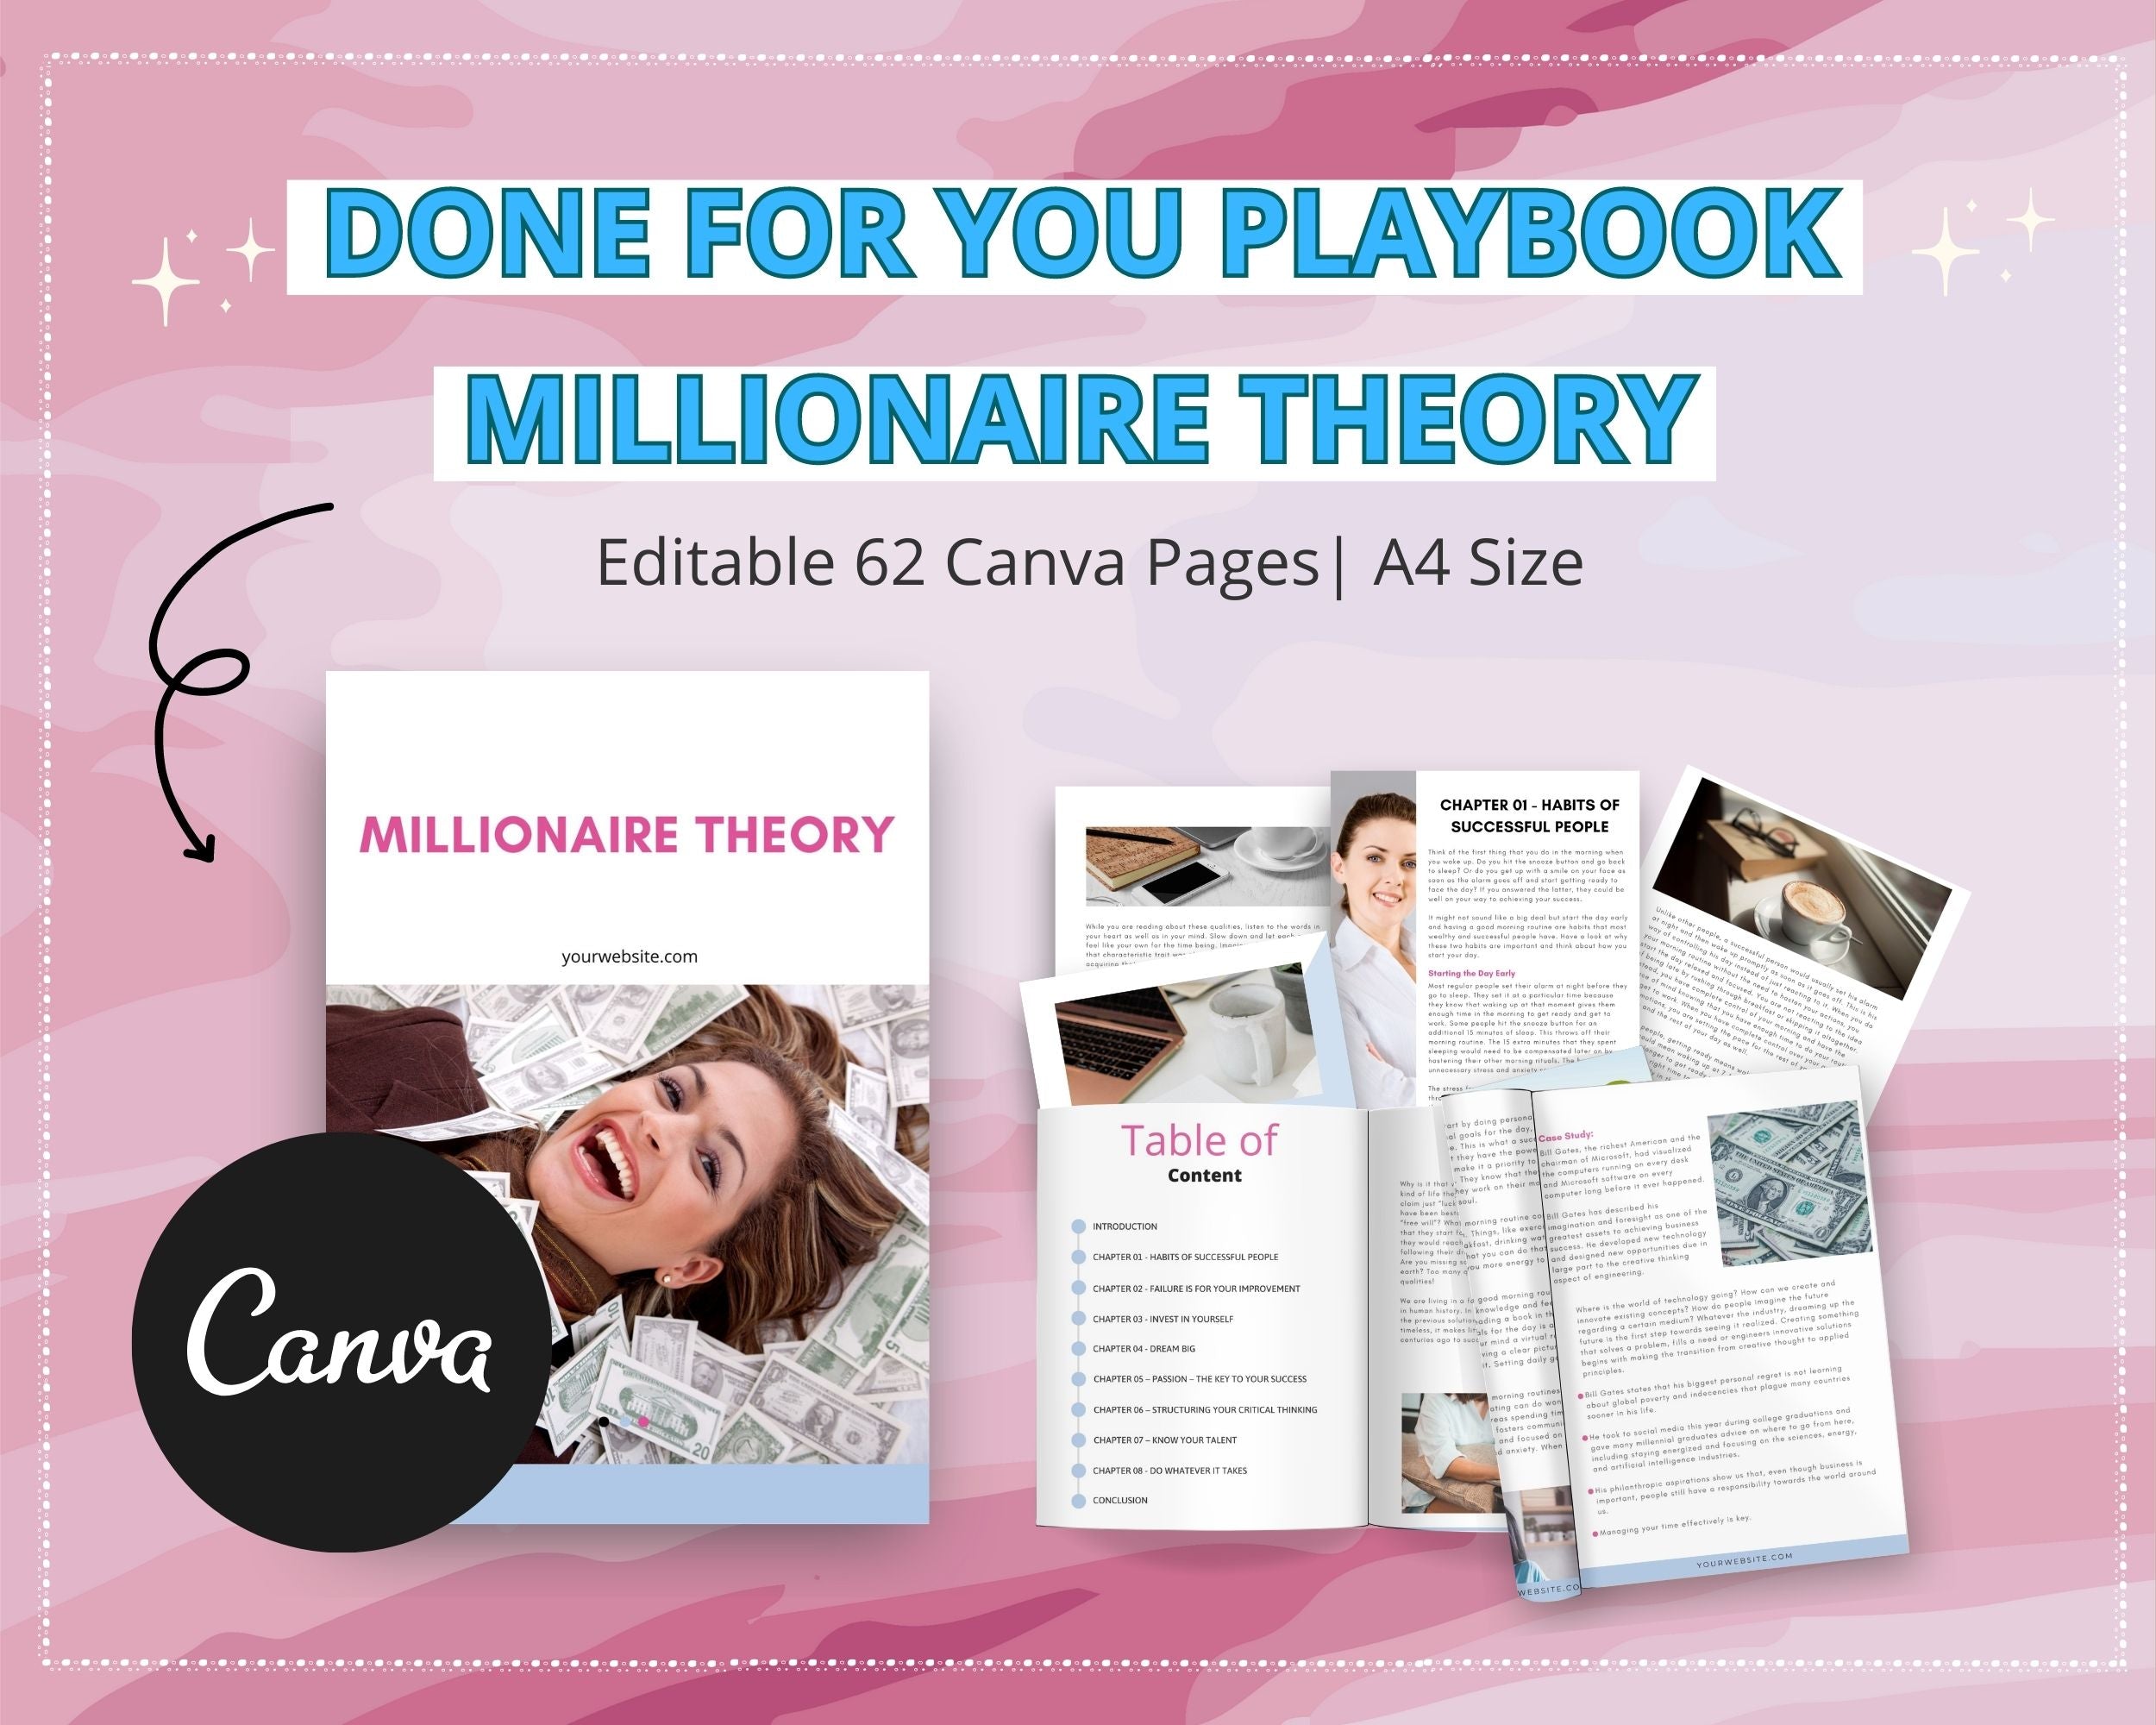 Millionaire Theory Playbook in Canva